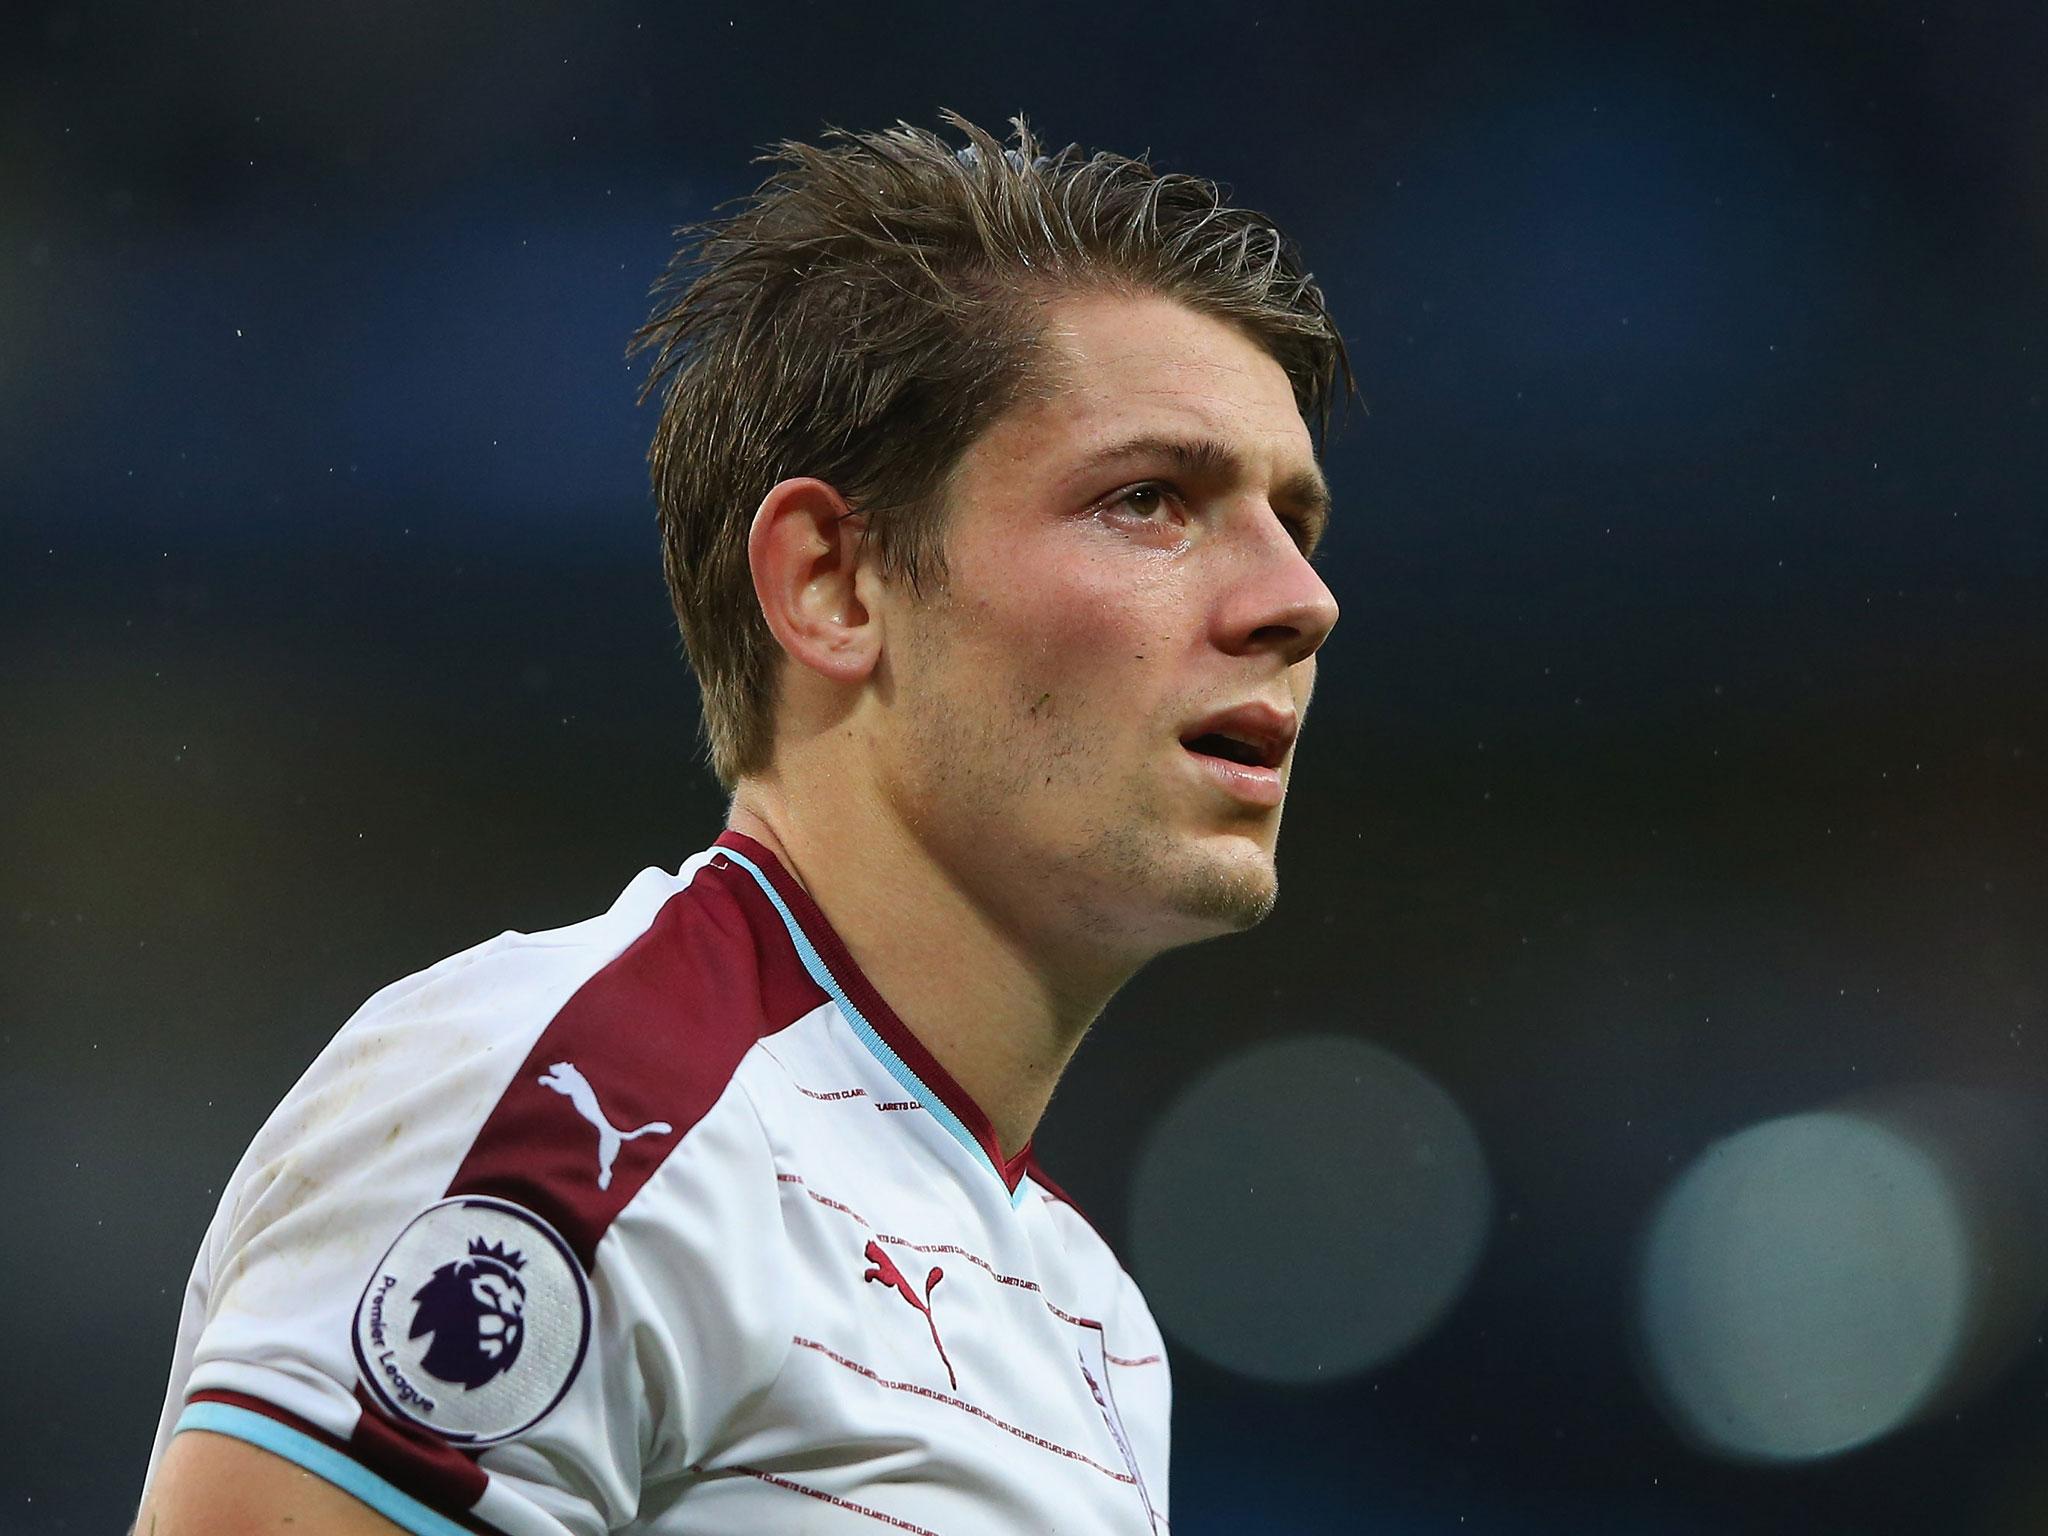 Tarkowski and his club tried to argue that the three-game suspension was excessive